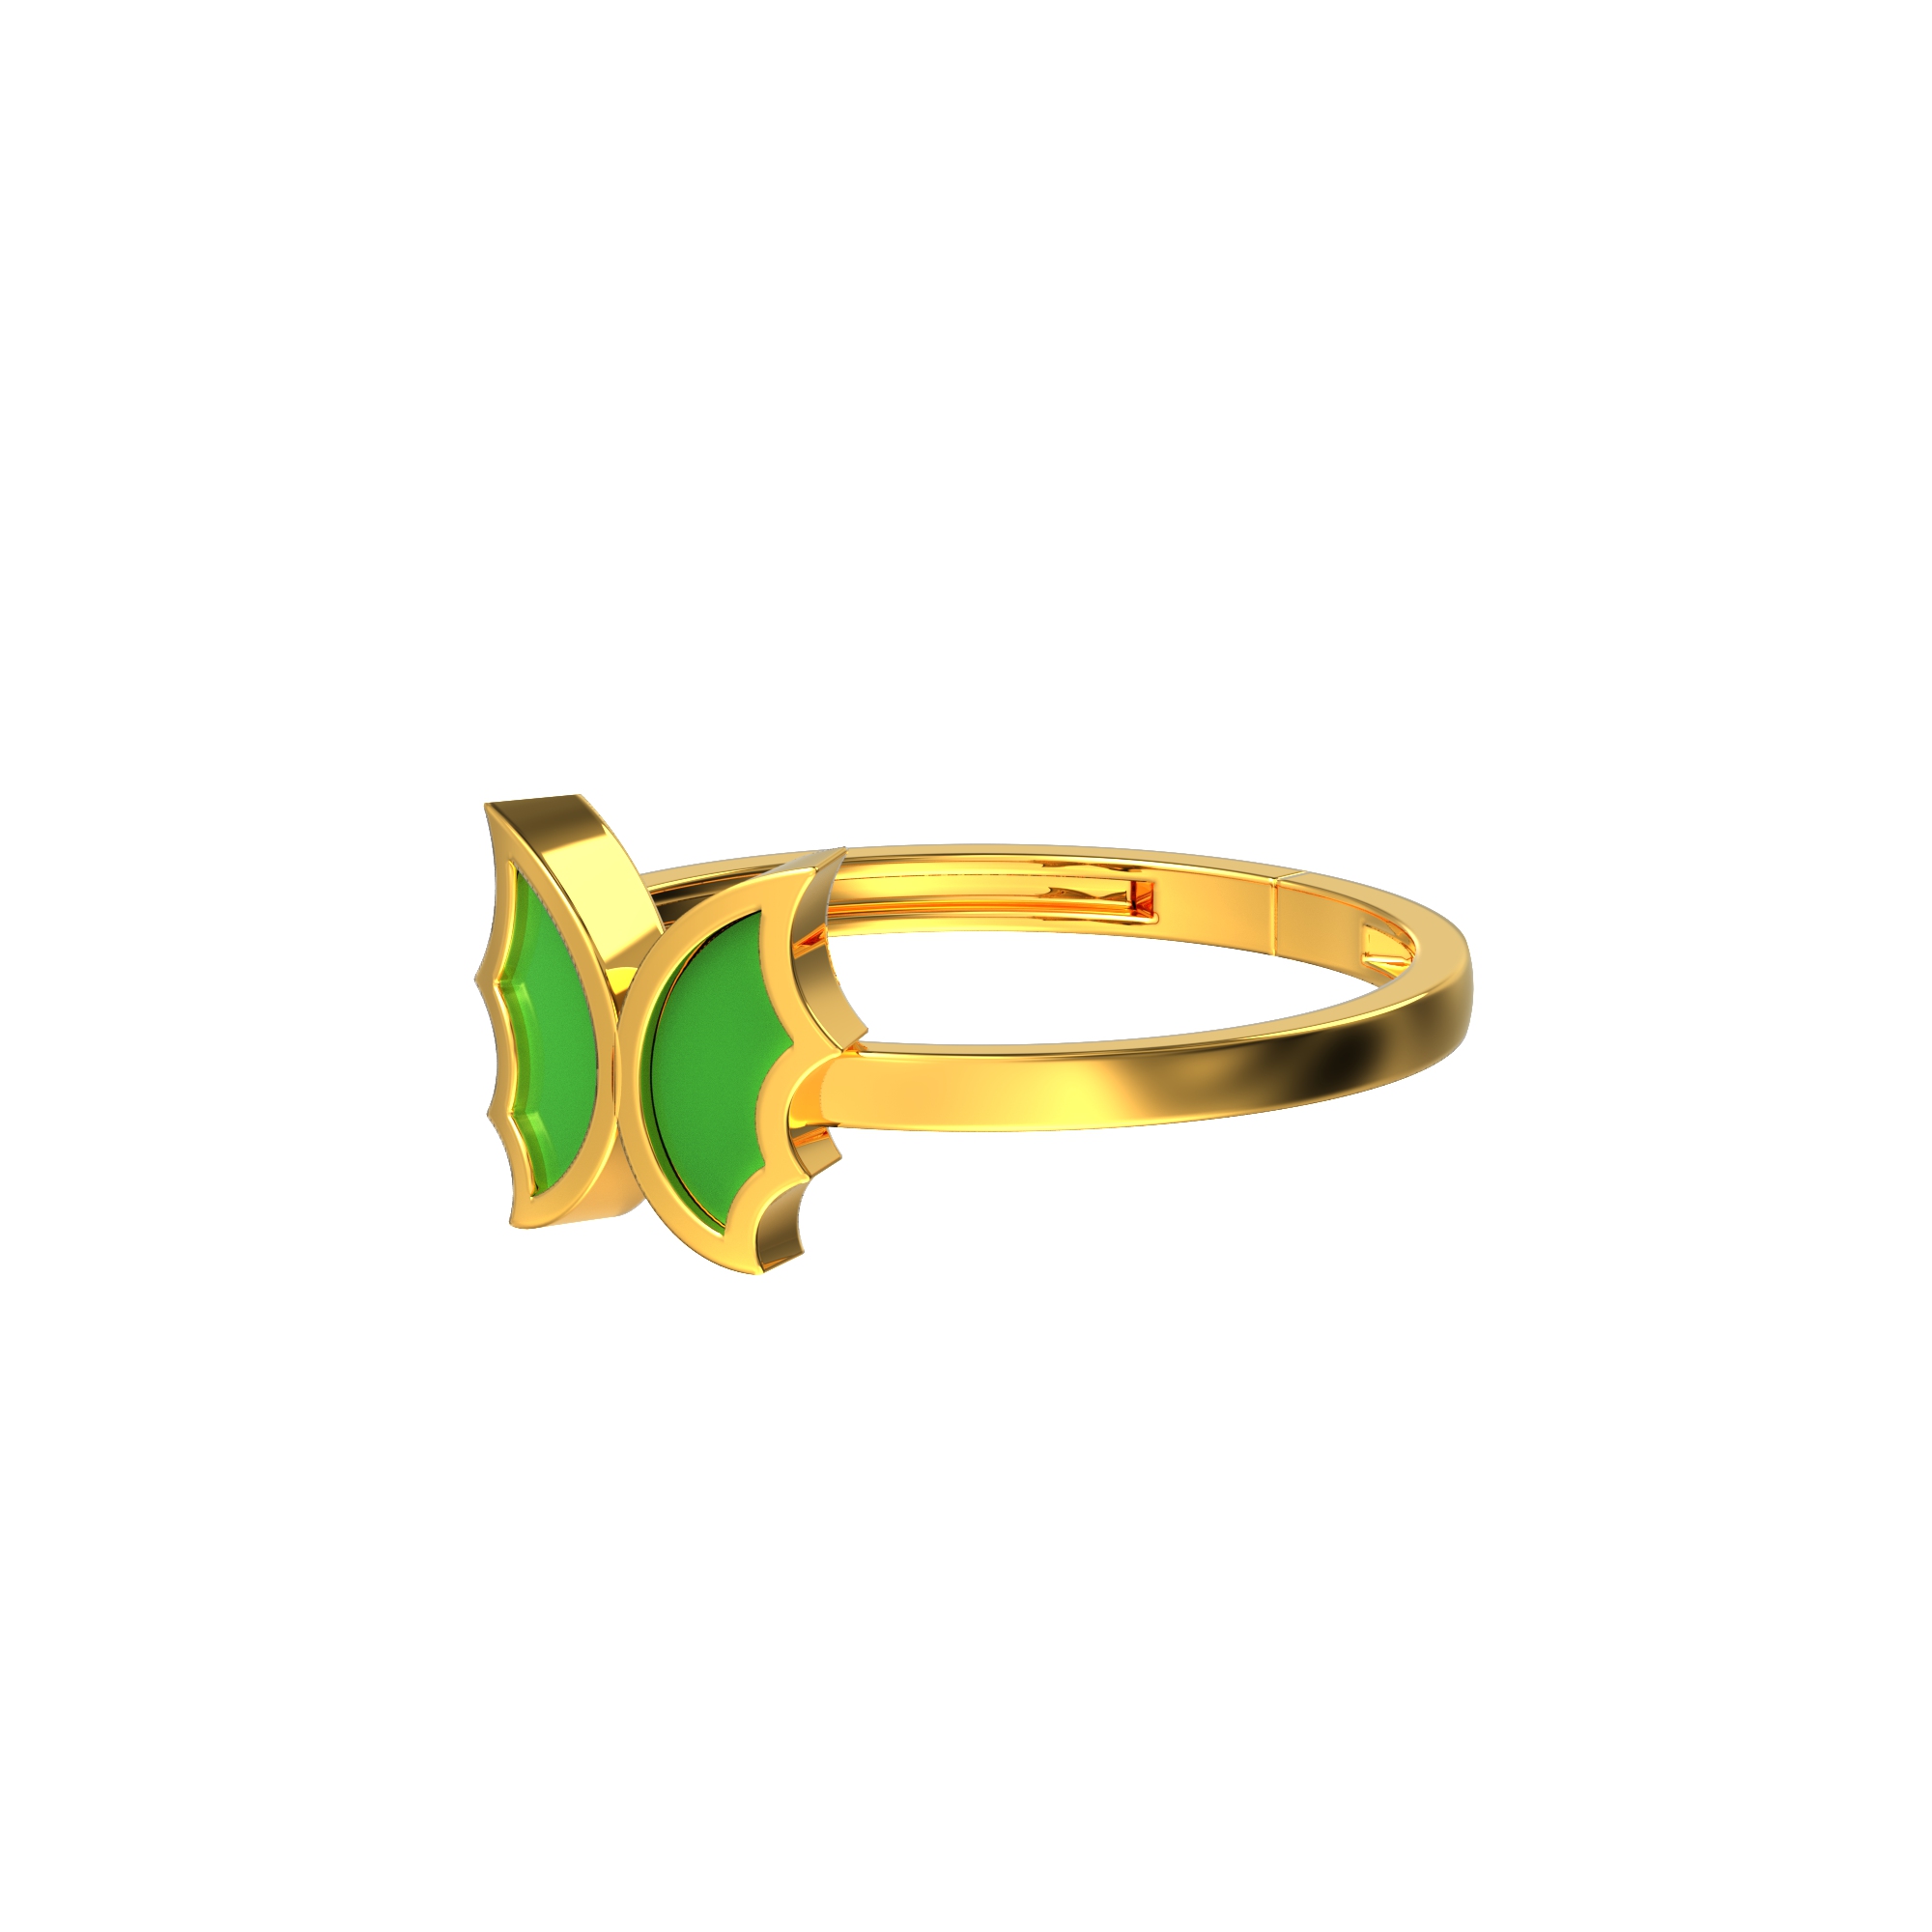 SPE Gold - Butterfly Shaped Female Gold Ring - SPE Gold